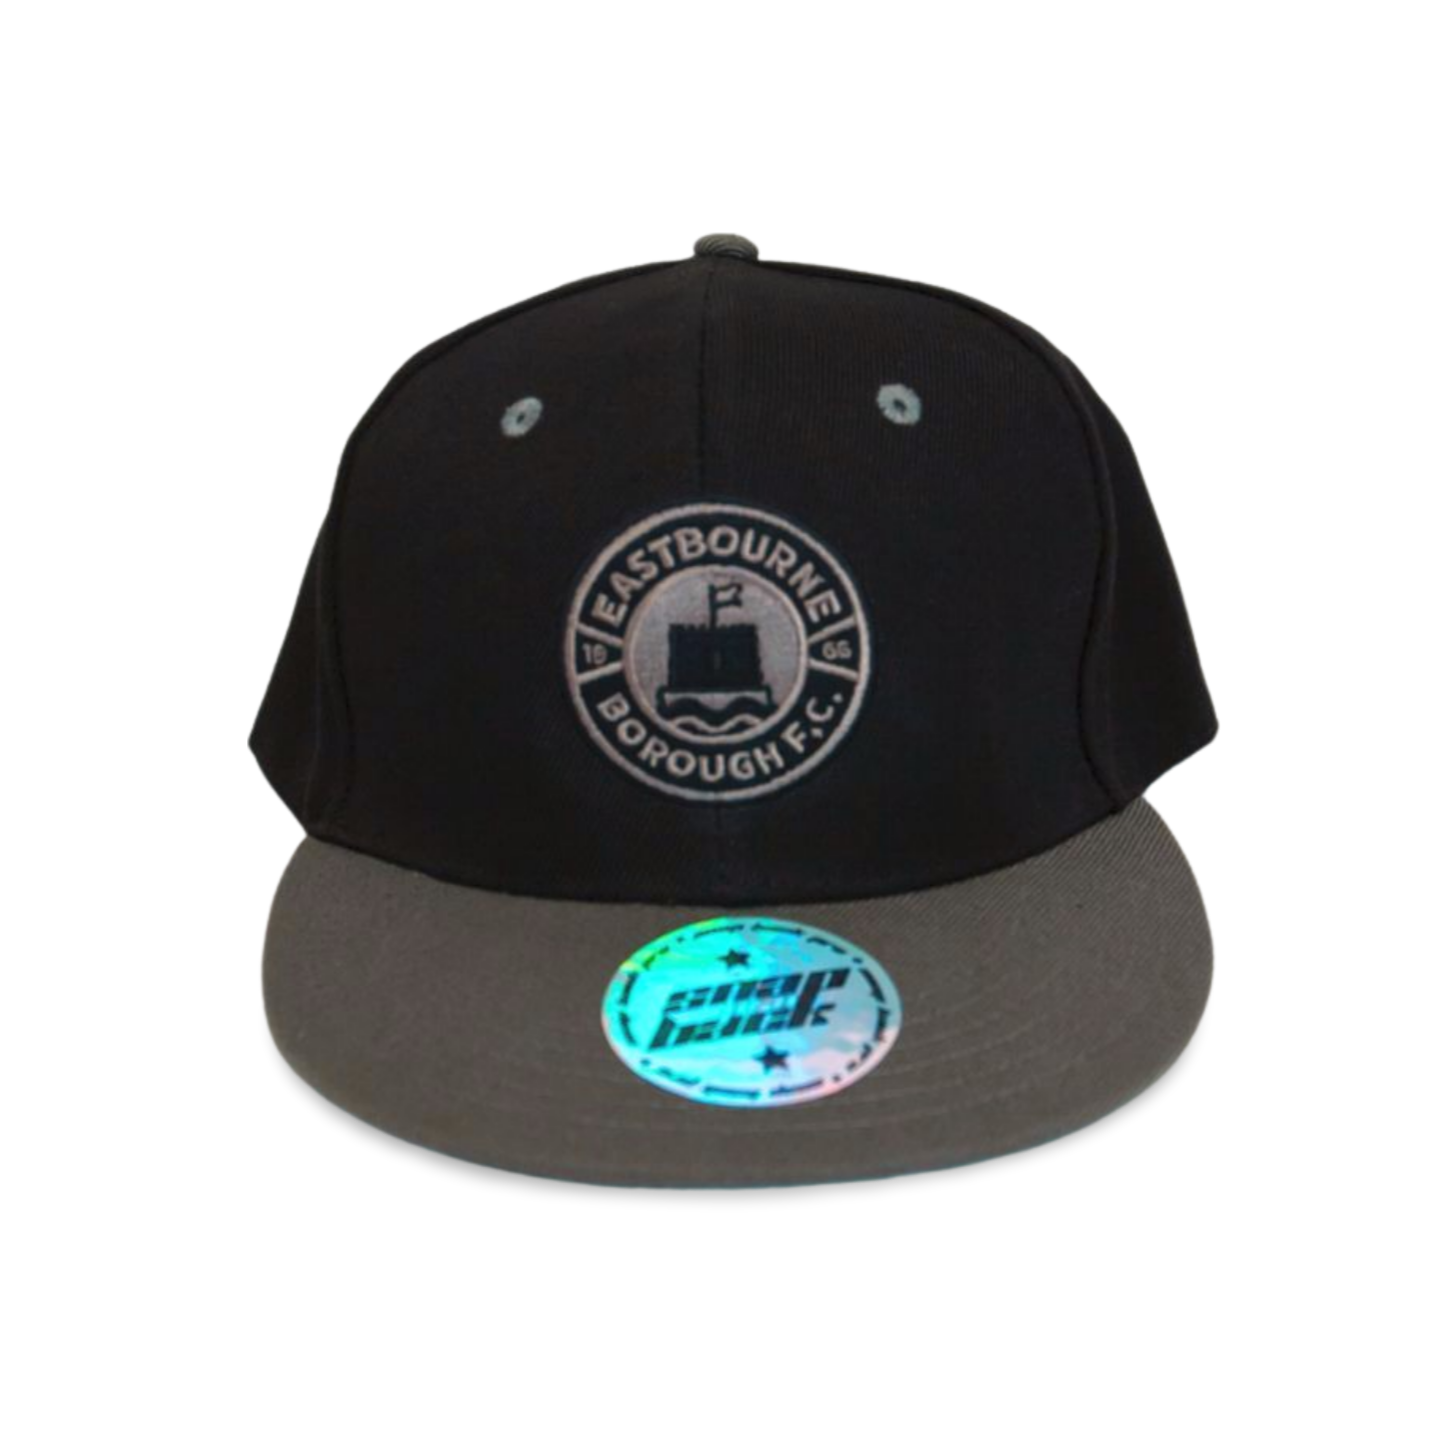 Black Embroidered Snap Back Cap